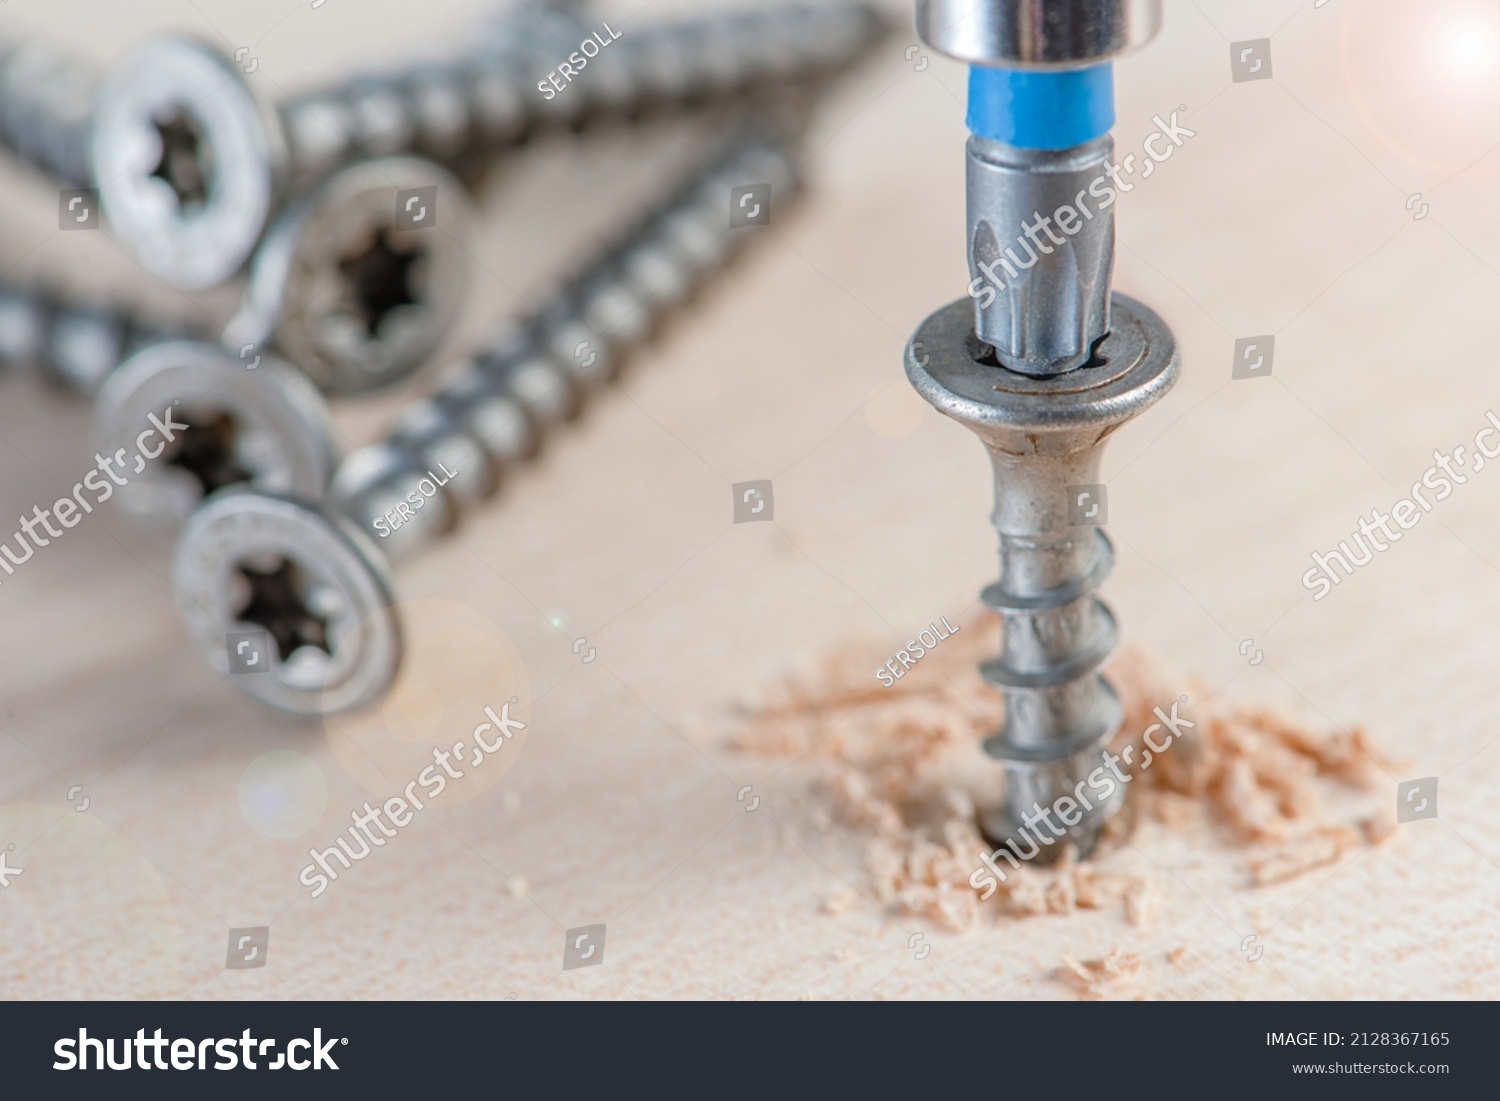 Screw the screw into the board. Furniture production, a screwdriver twists a self-tapping screw into a board. Several silver screws lie on the desktop #2128367165